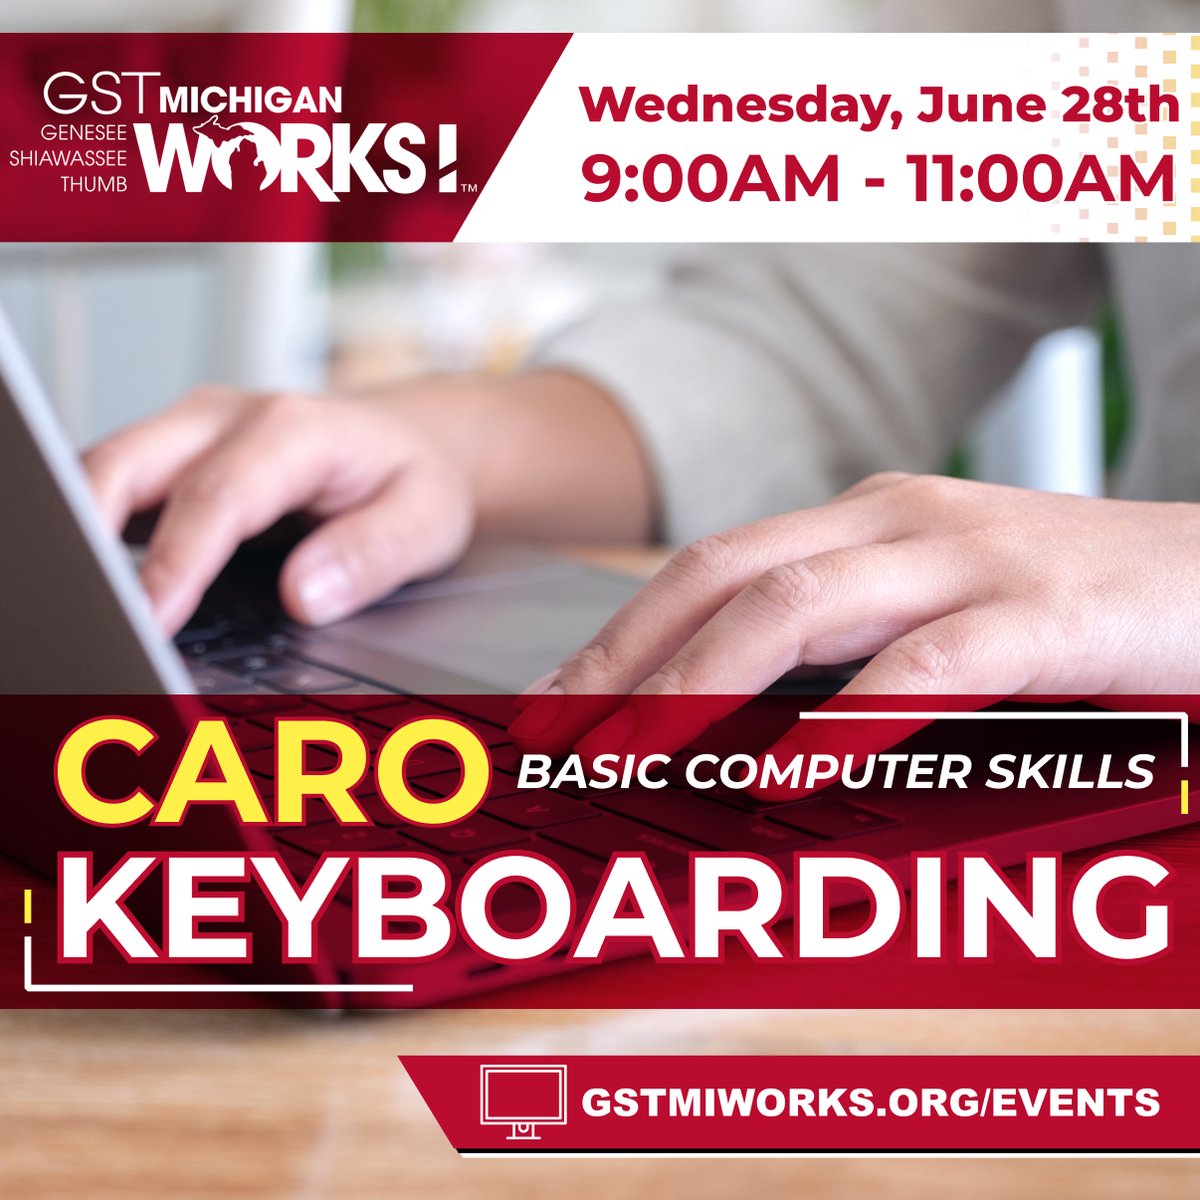 Learn to effectively use/navigate a keyboard & type in the workplace at the Basic Computer Skills event in Caro! 

Join us on June 28th from 9 - 11am. Limited seating, call to reserve your spot today!
 
Learn more about at gstmiworks.org/events.
#keyboarding #computerskills